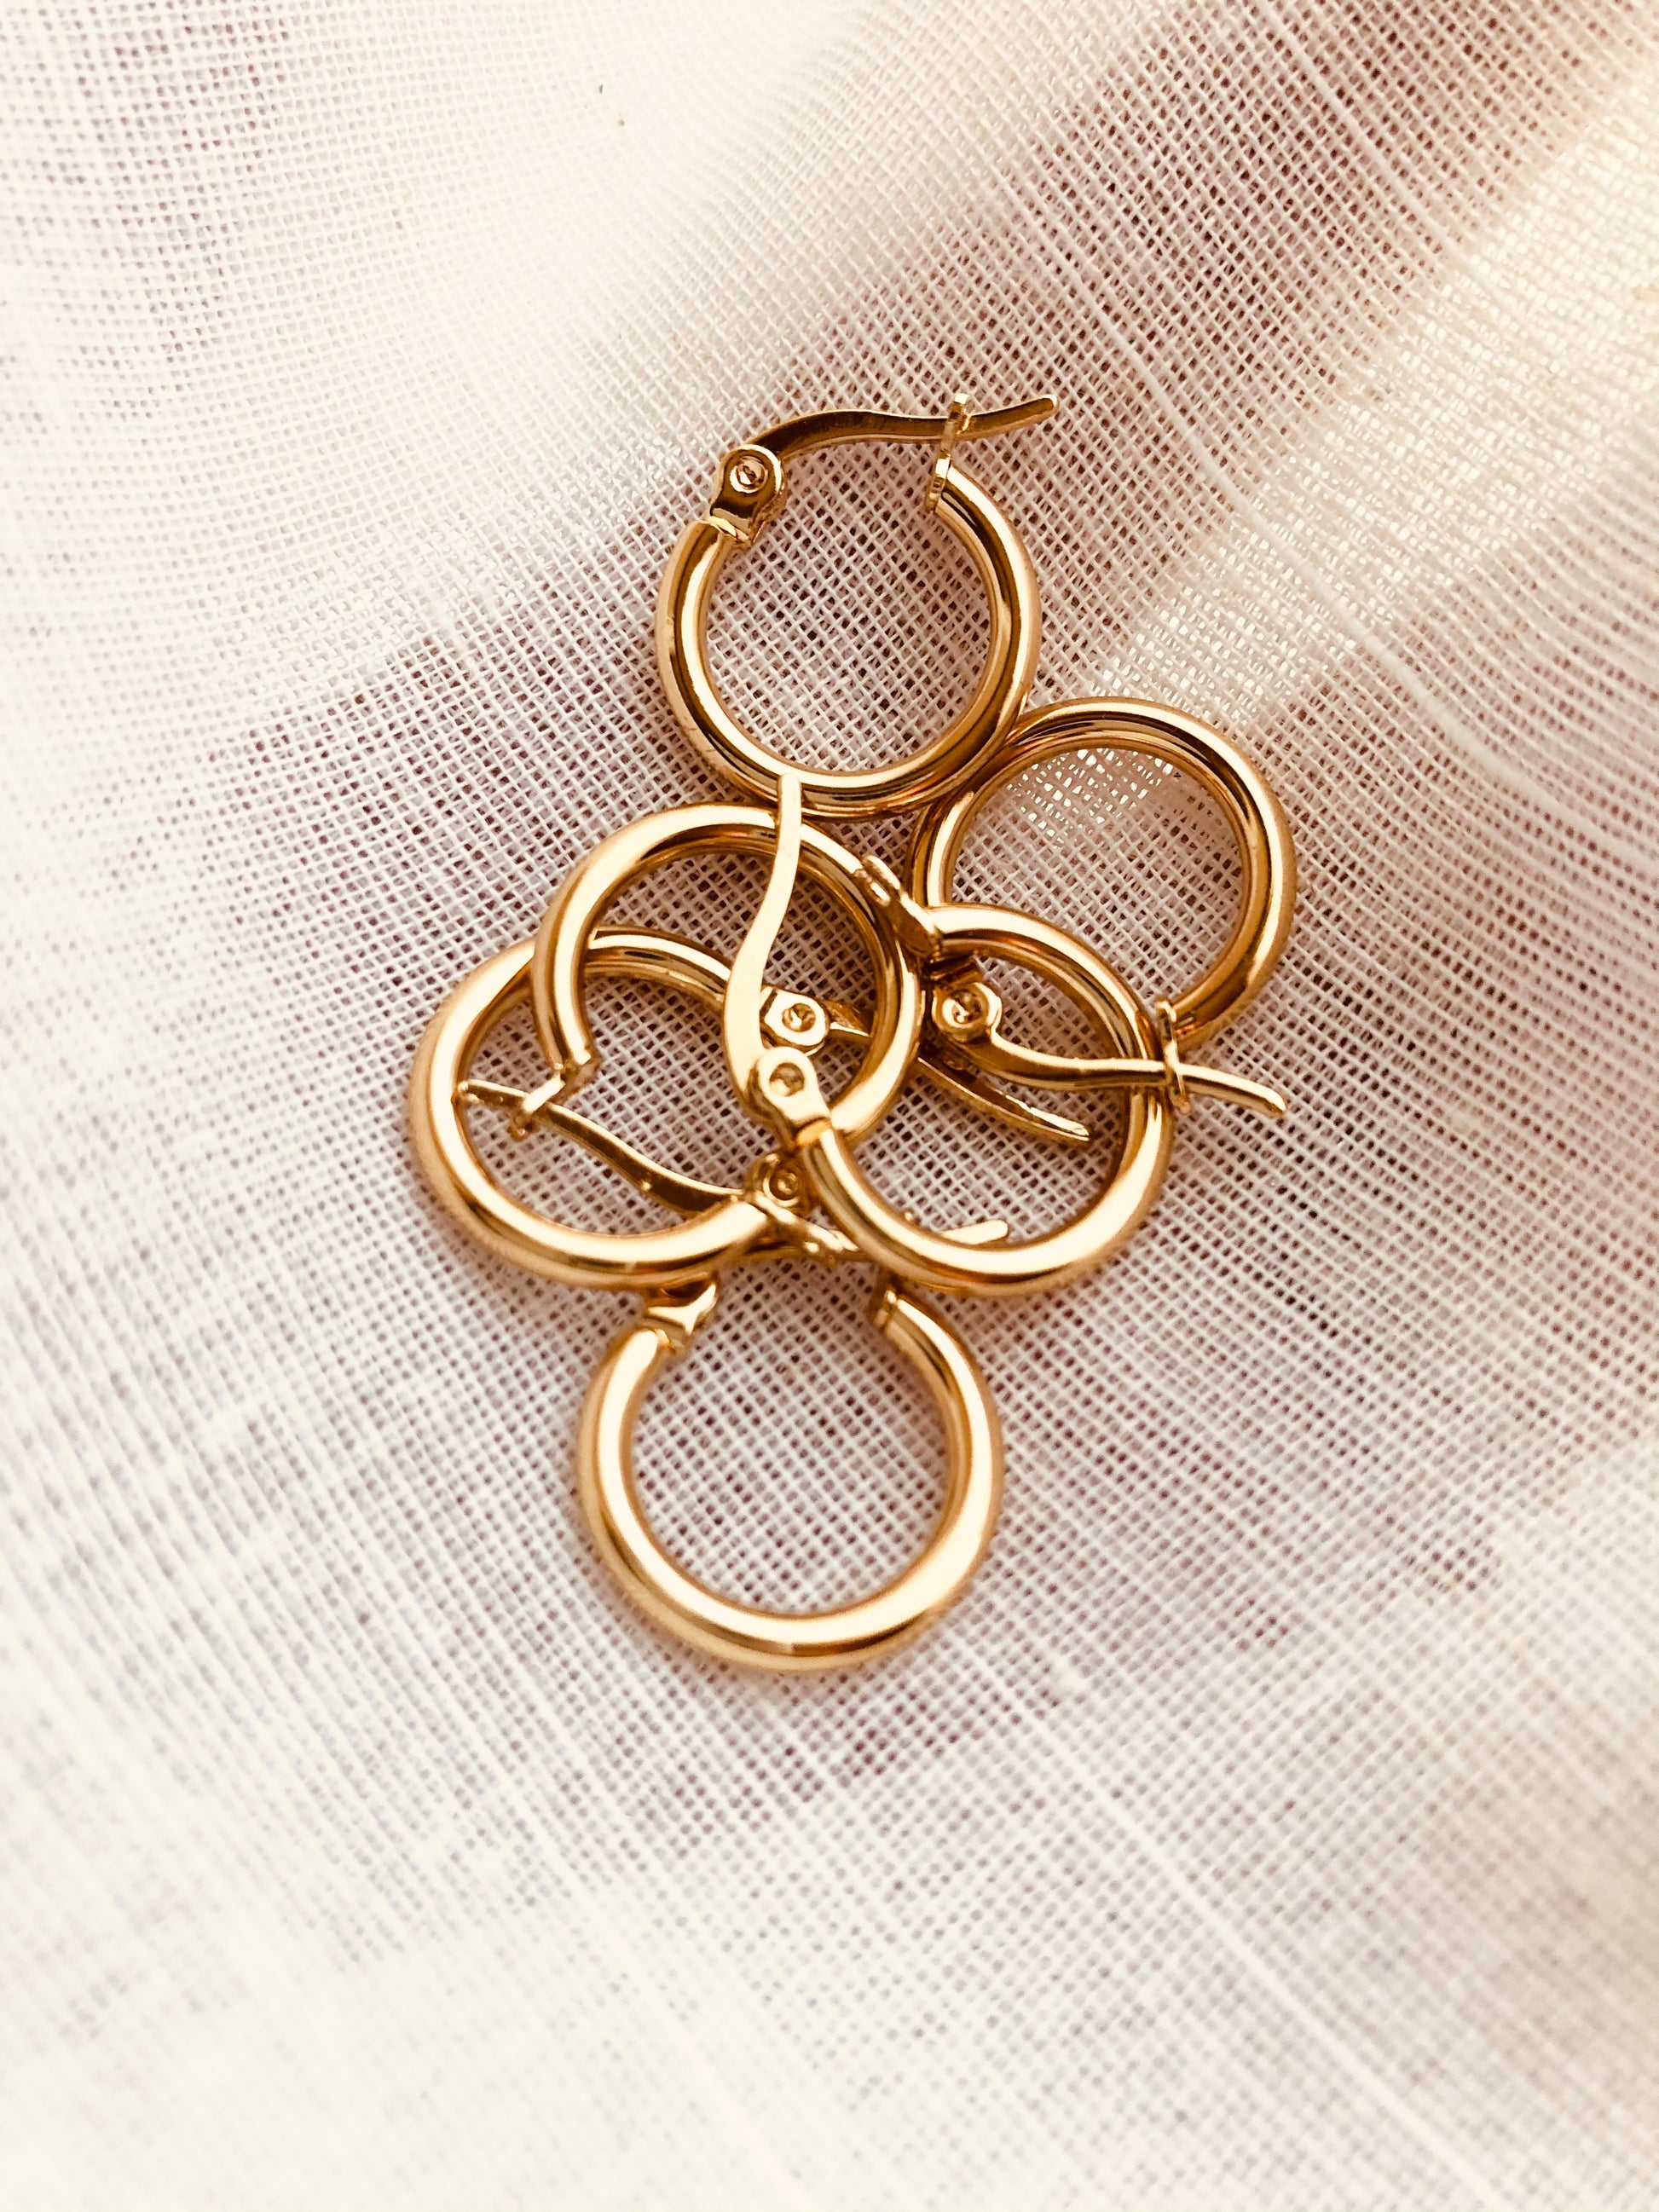 Gold 15mm Hoop Earrings, Gold 15mm Hoop Earrings, Shiny Hoop Earrings, Gold Surgical Steel Hoop Earrings, Small Gold Hoop Earrings, Huggies Earrings, Gift For Her